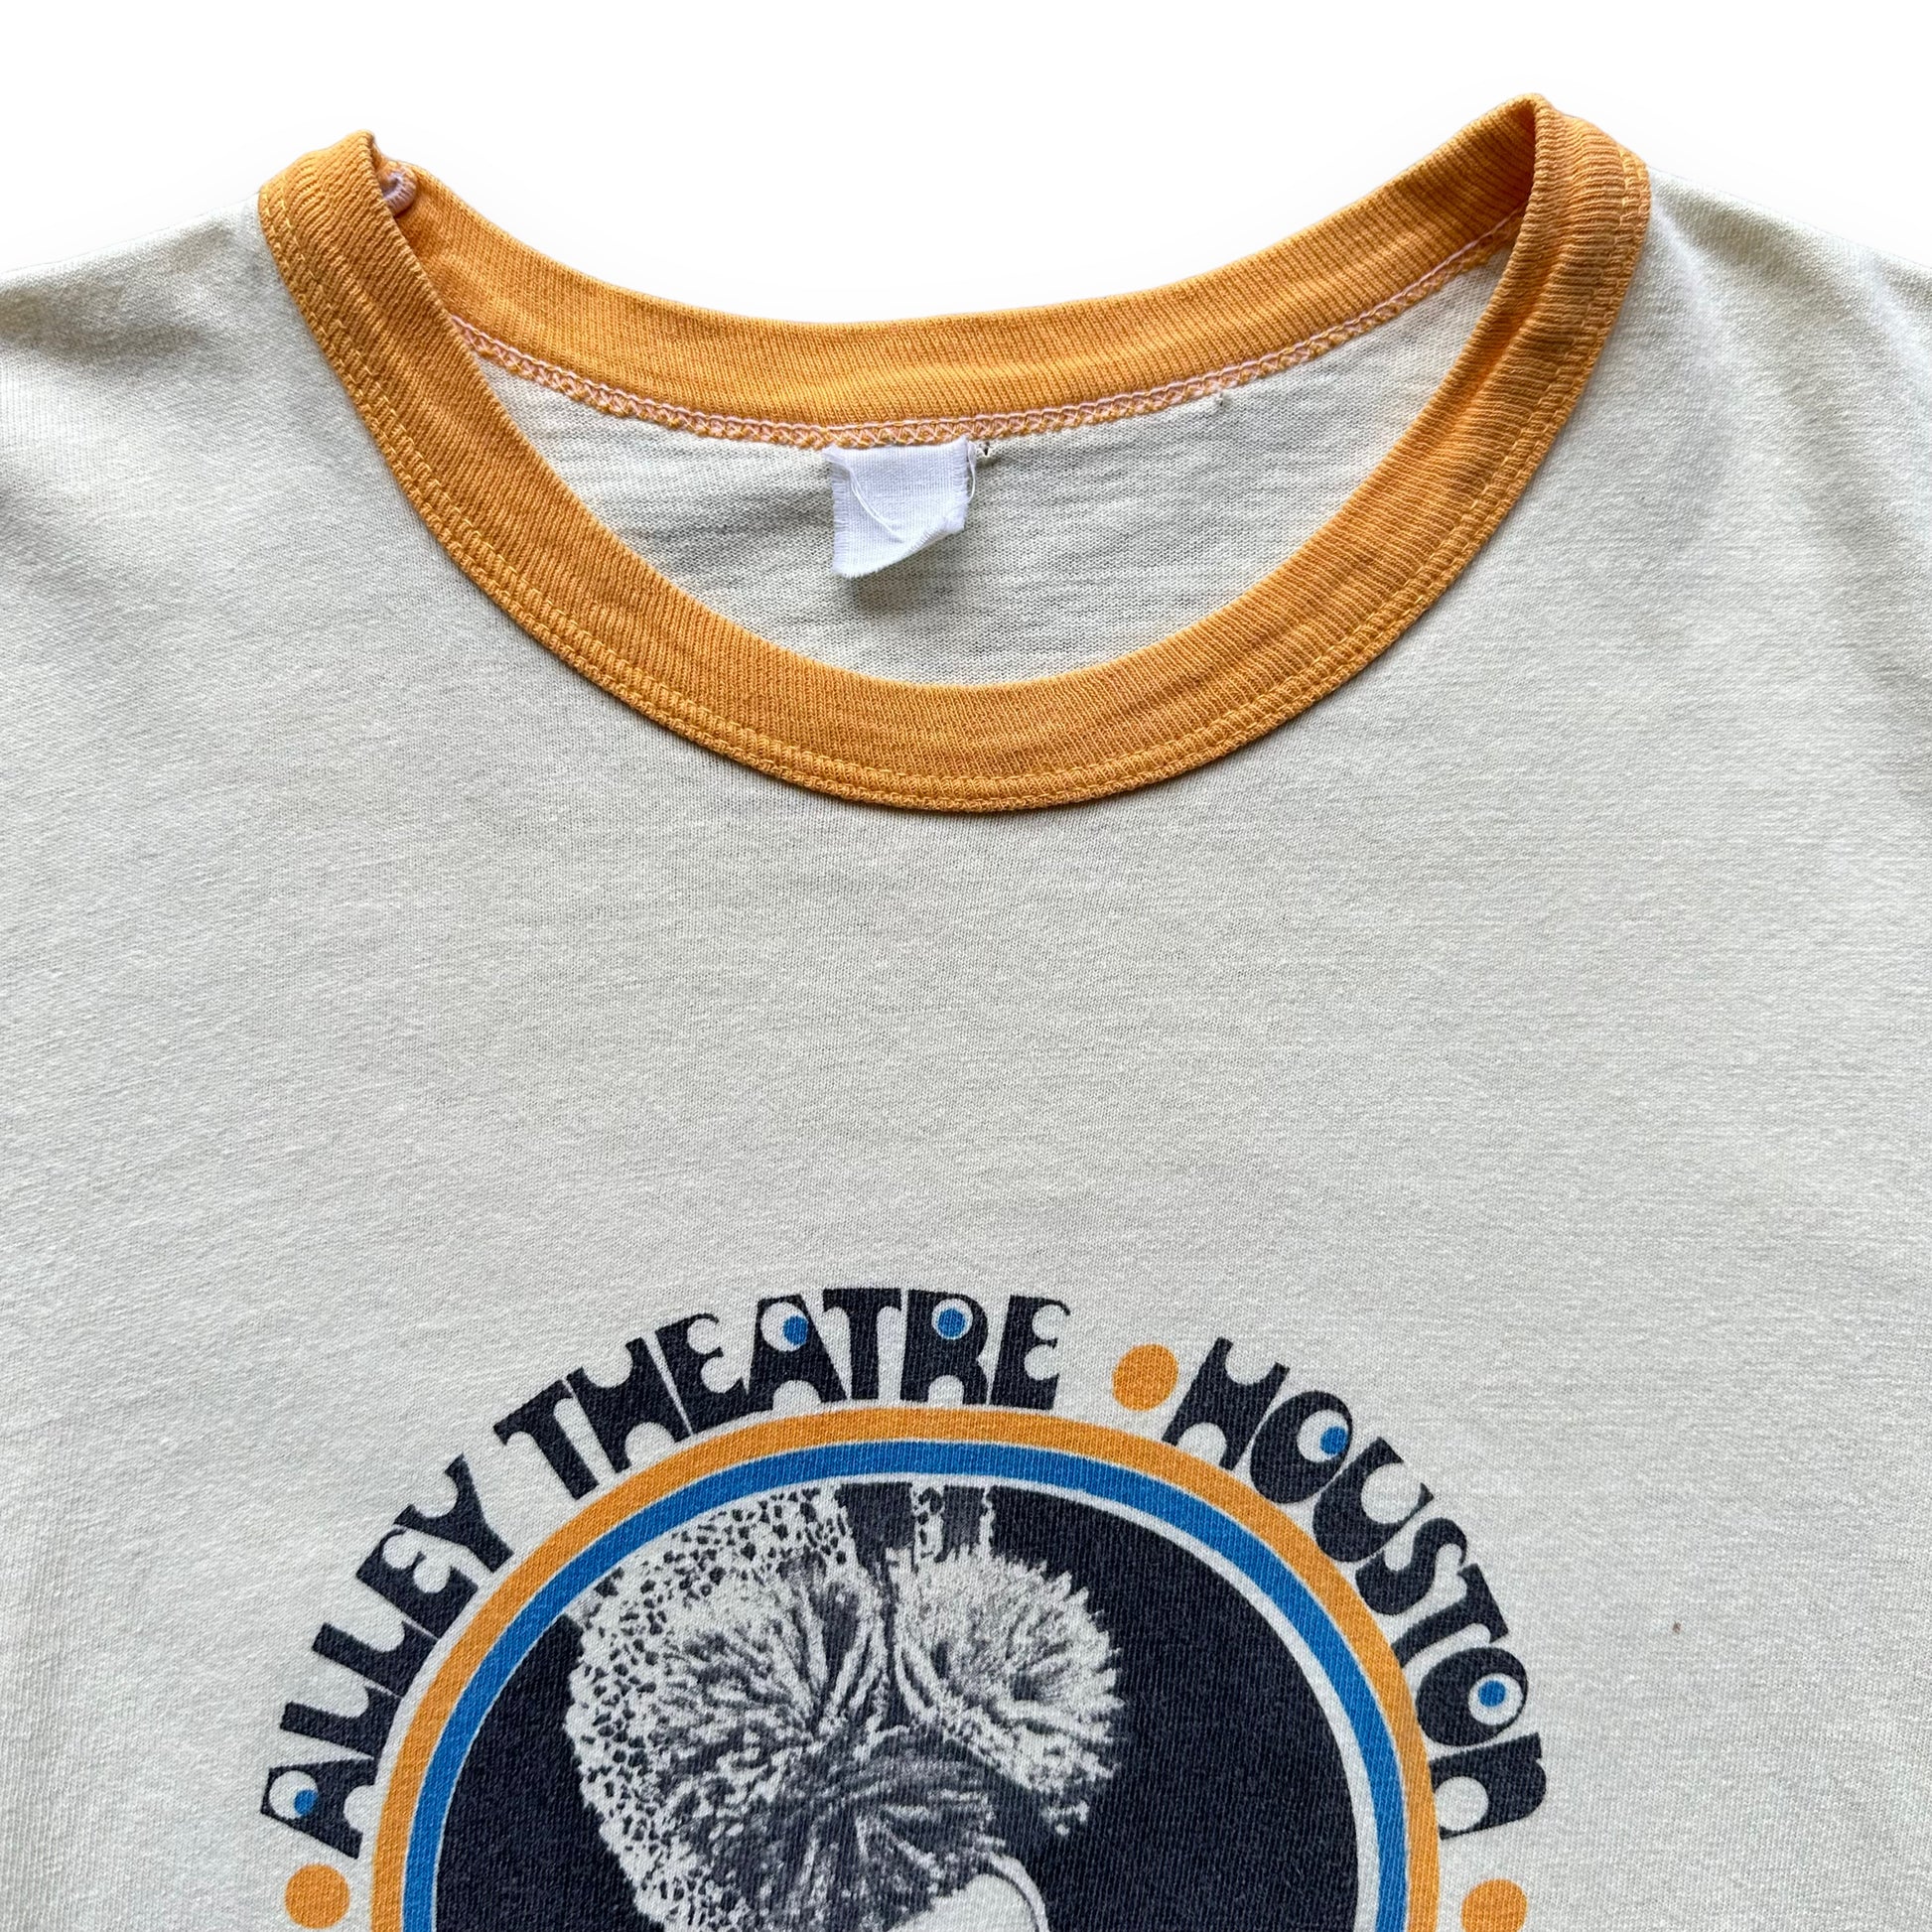 Upper Front Faded Tag View on Vintage 1976 Alley Theatre Houston Summer Film Festival Ringer Tee SZ M | Vintage T-Shirts Seattle | Barn Owl Vintage Tees Seattle